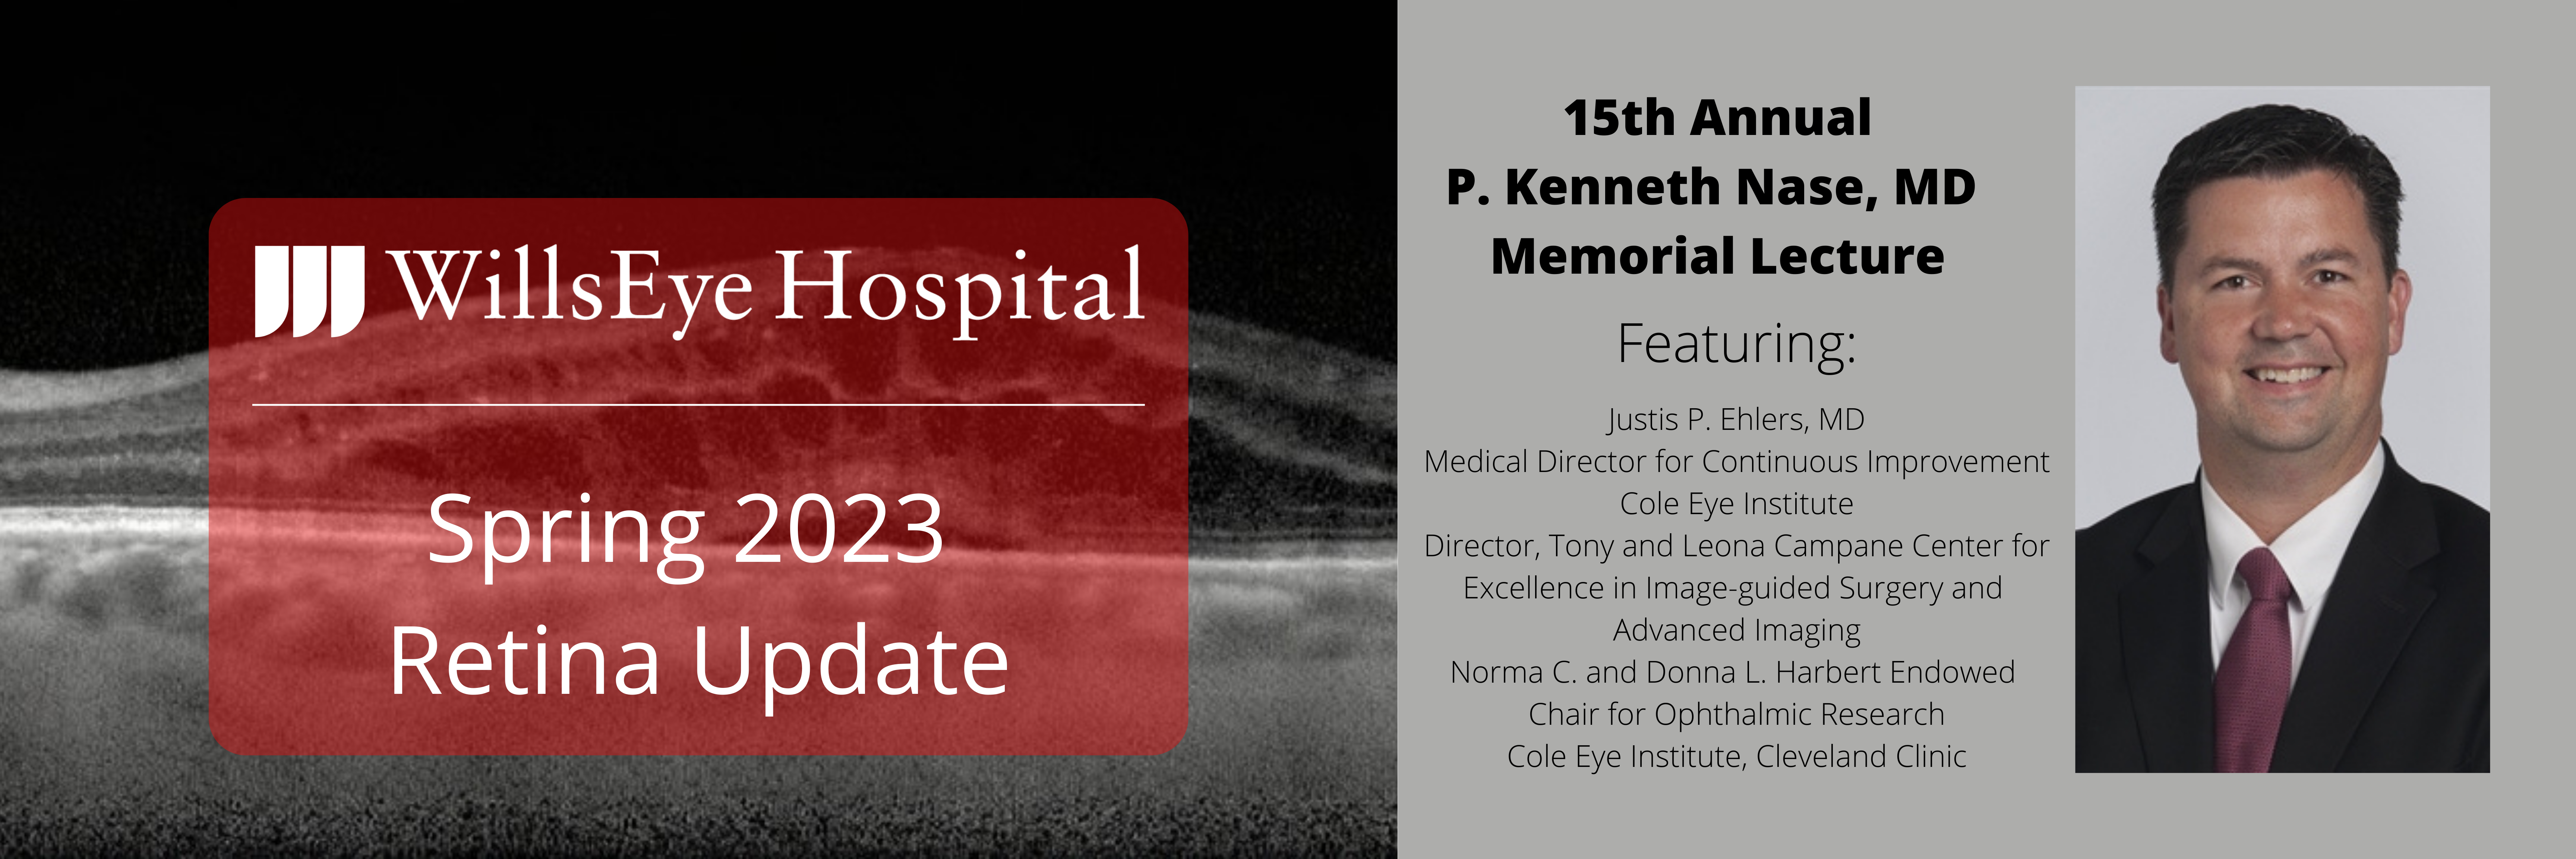 OnDemand Retina Update - Feat. 15th Annual P. Kenneth Nase Memorial Lecture Banner